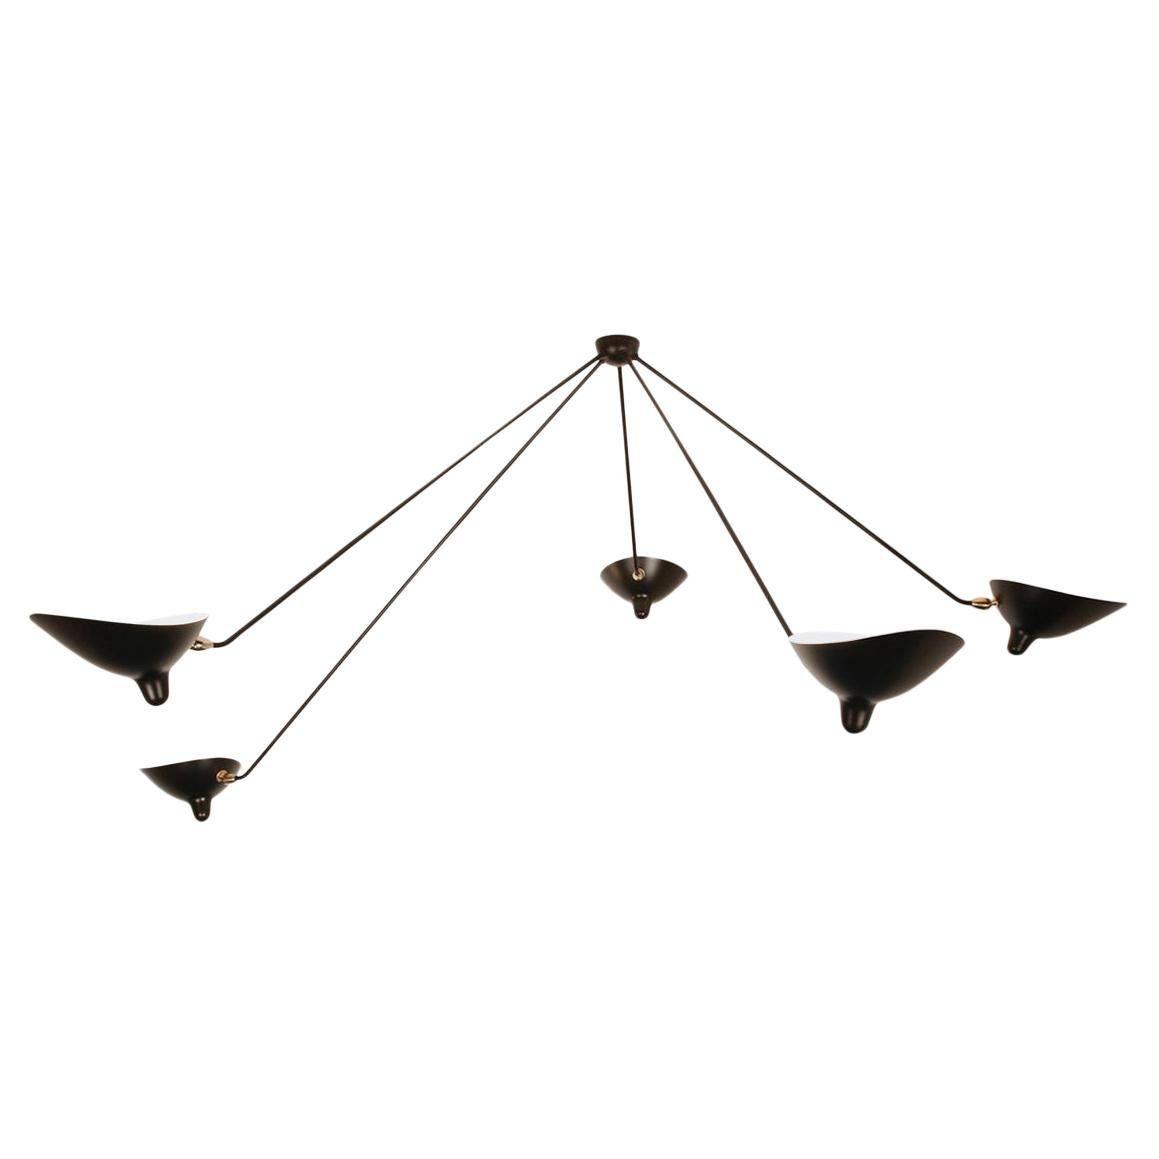 Serge Mouille Mid-Century Modern Black Five Fixed Arms Spider Ceiling Lamp